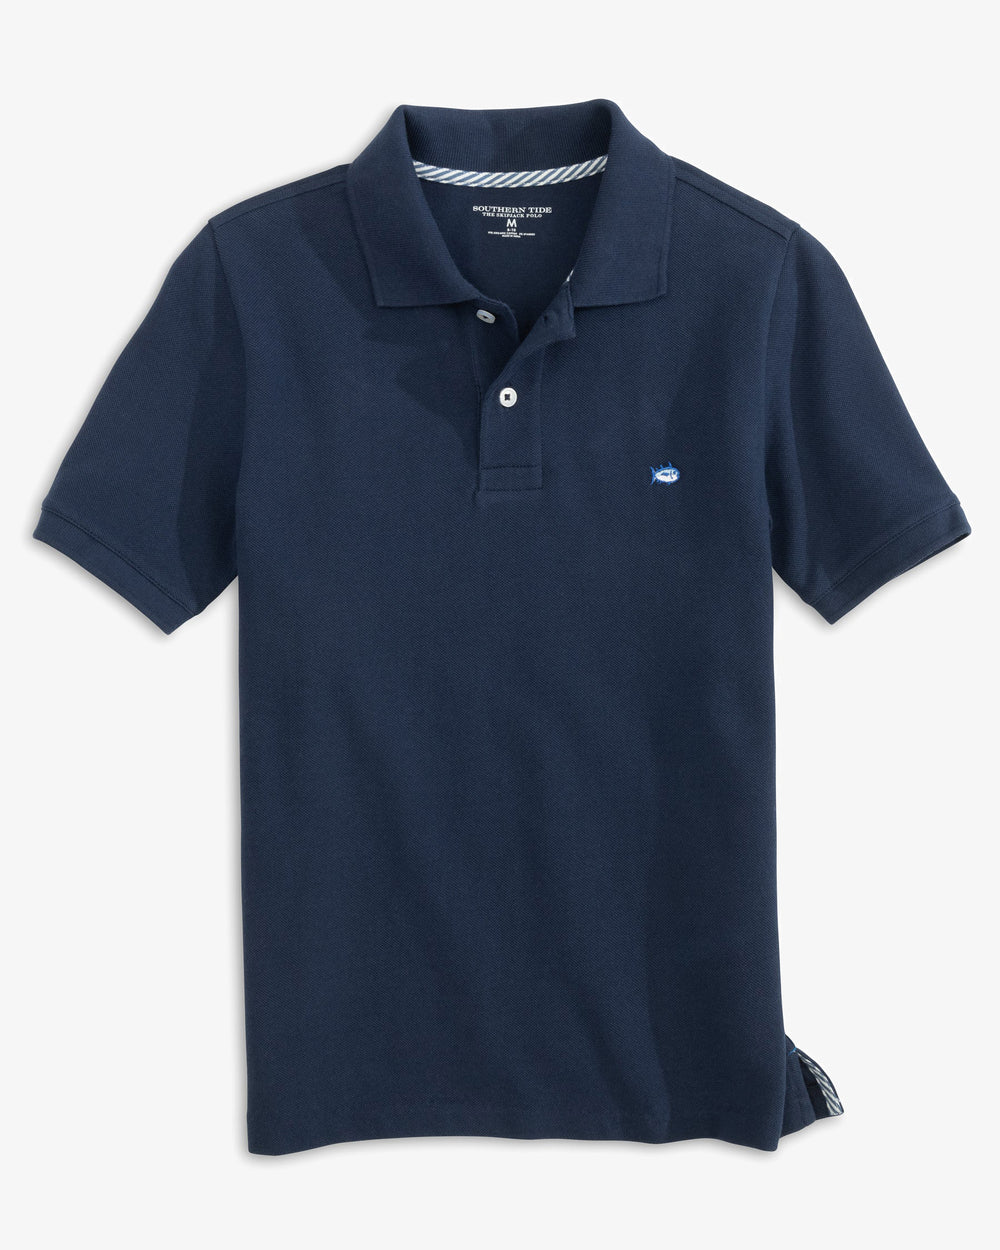 The front view of the Boys Skipjack Polo by Southern Tide - True Navy